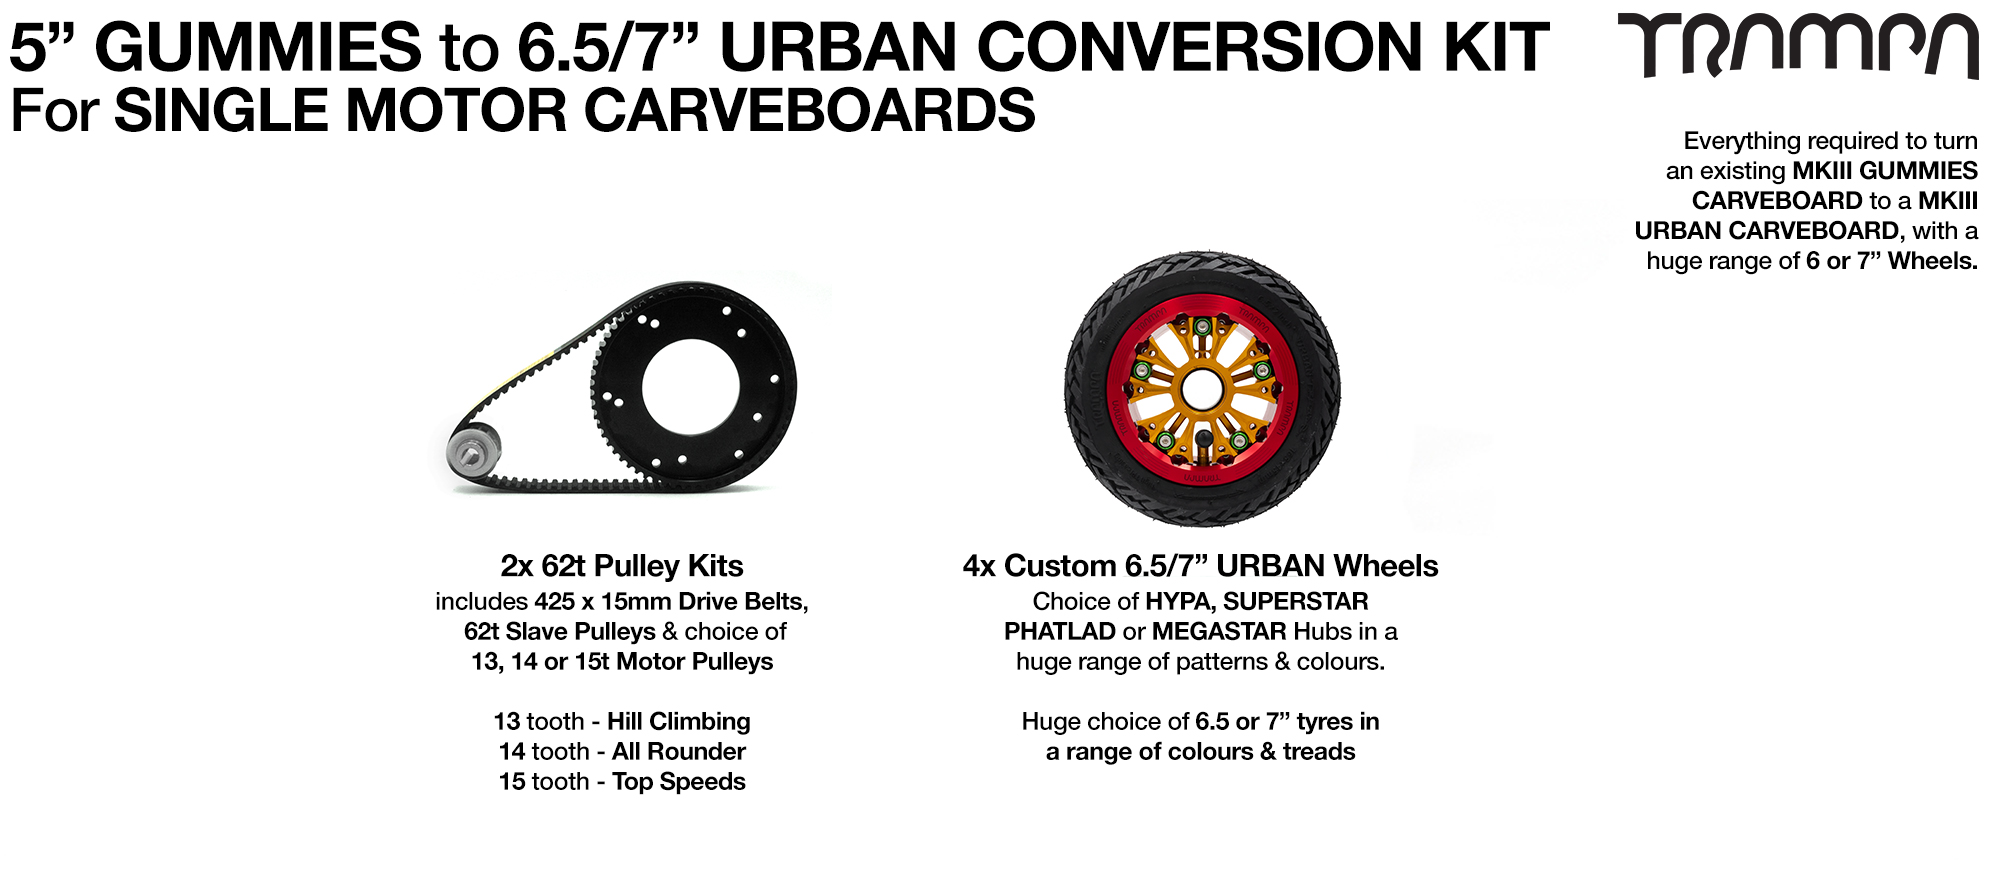 Gummies to Urban Carveboard complete Conversion kit with 4x Custom wheels for SINGLE Motor Mounts 